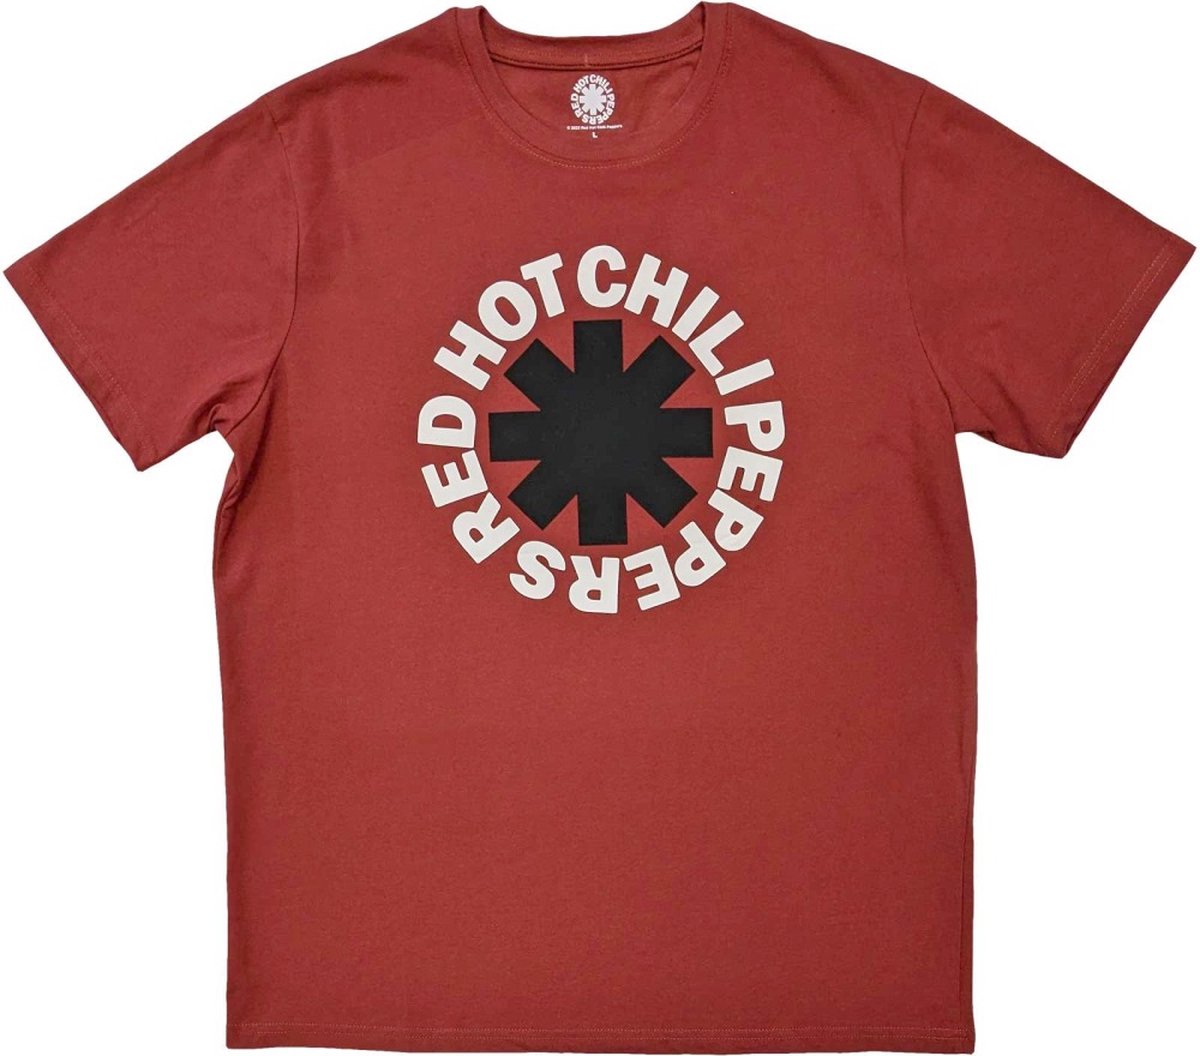 Red Hot Chili Peppers - Classic Asterisk Heren T-shirt - S - Rood